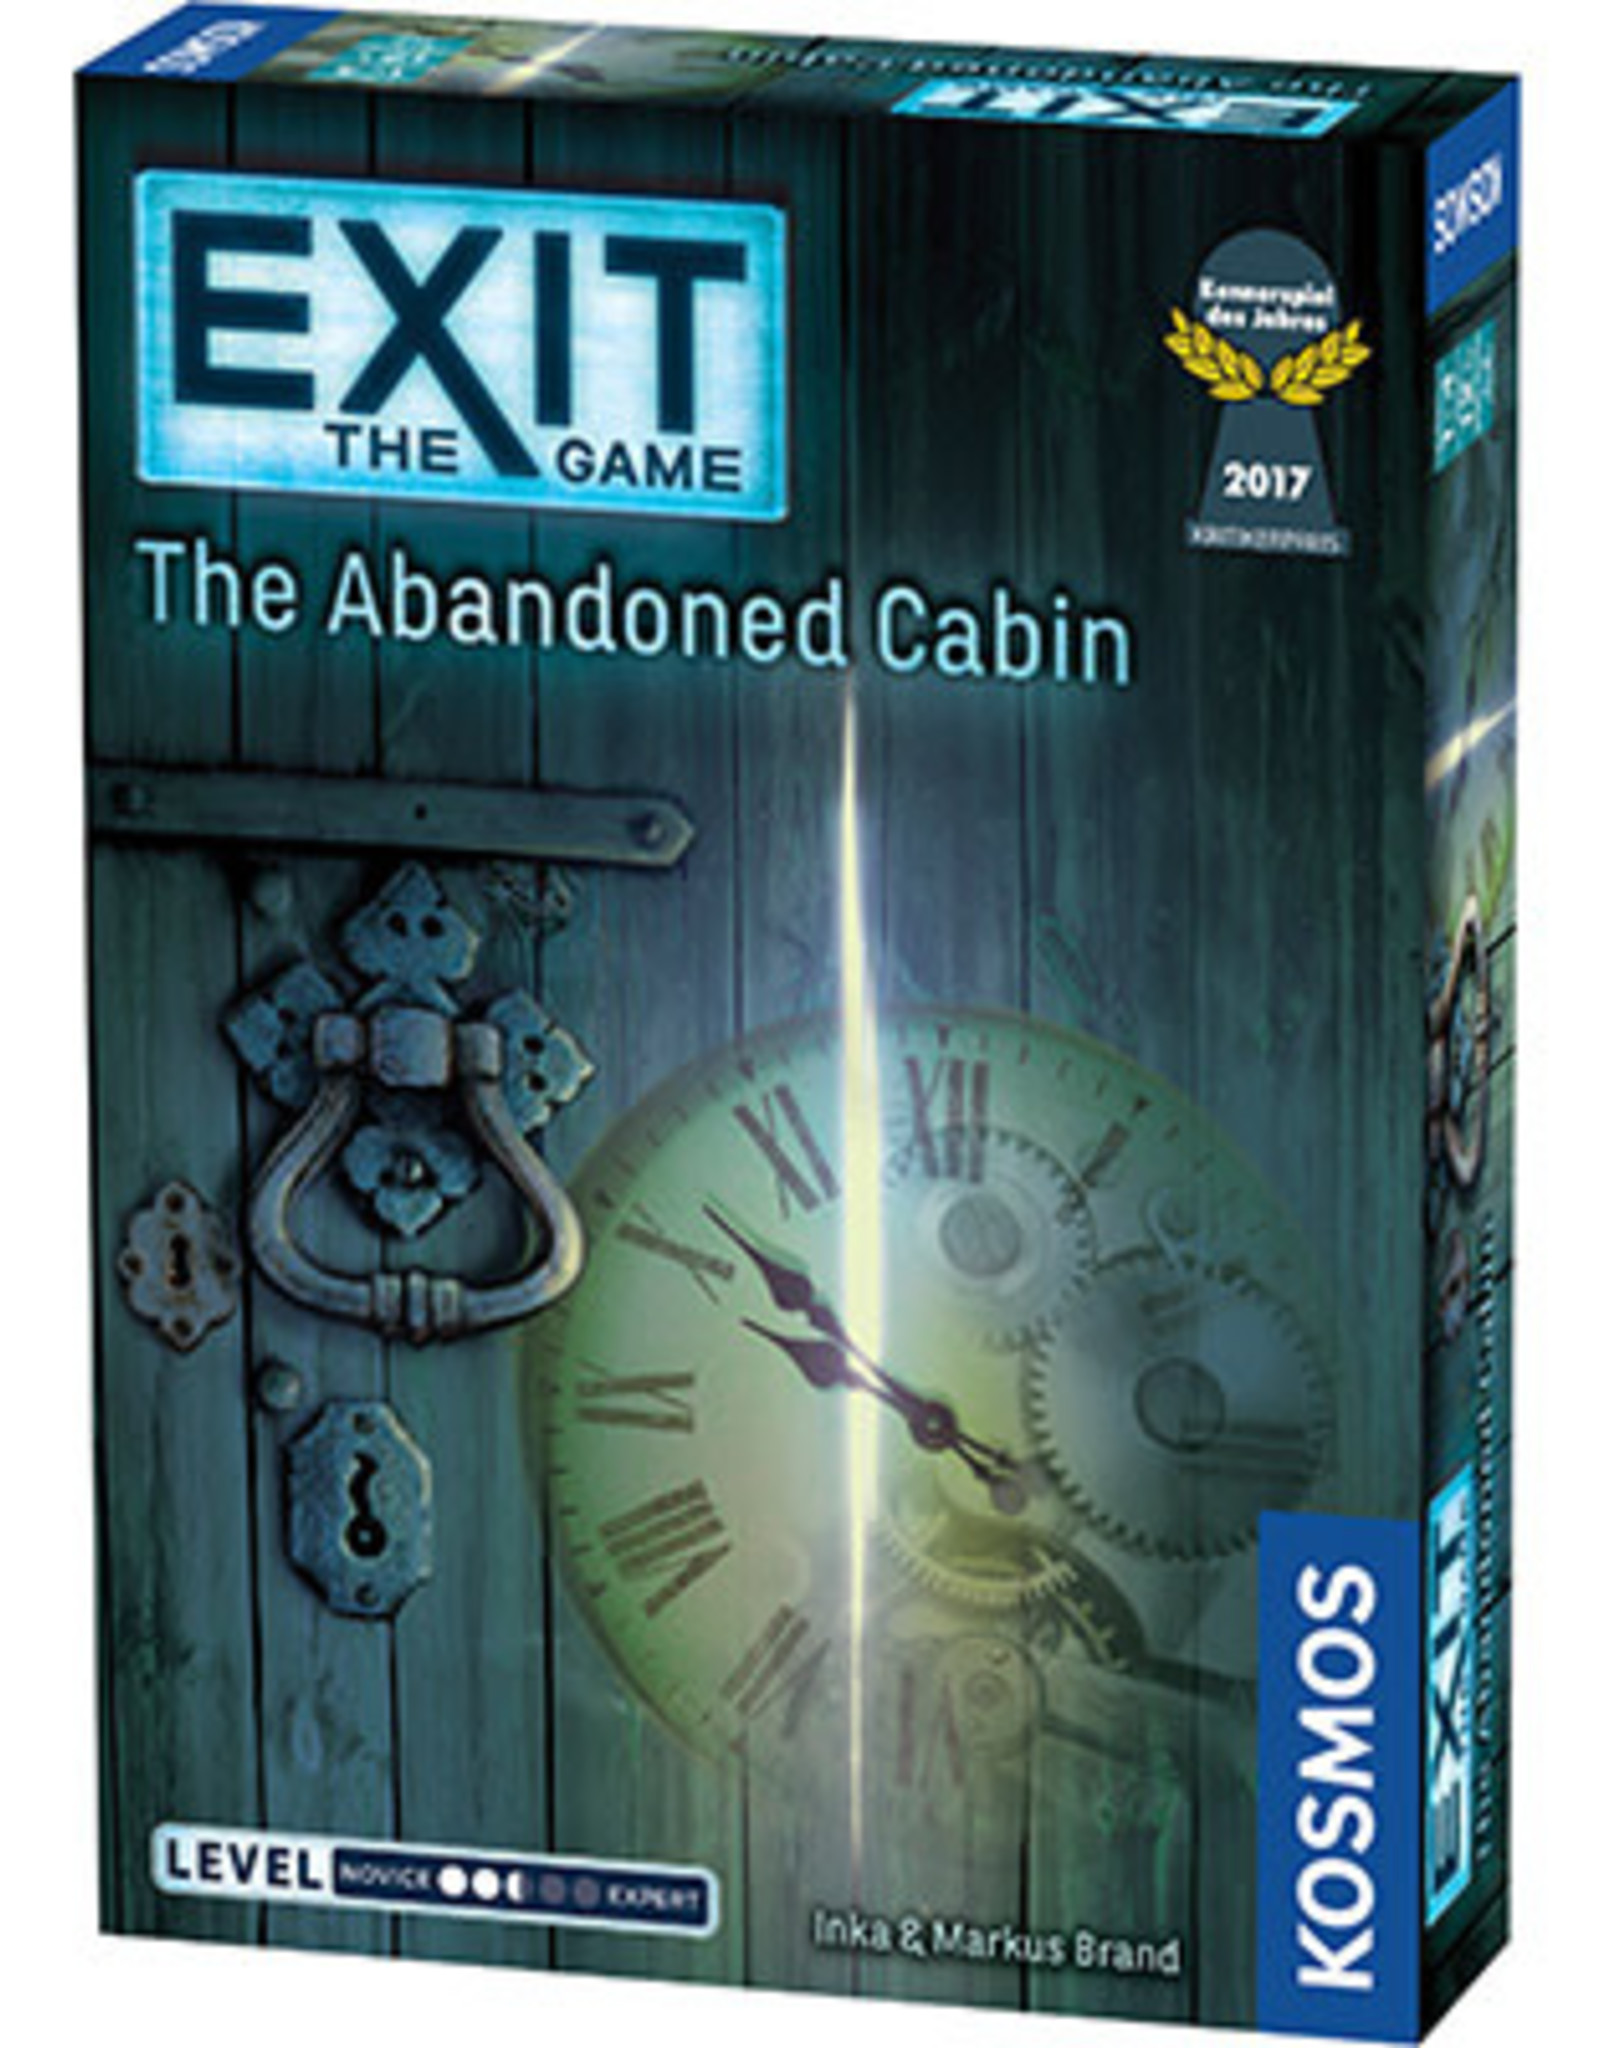 Thames & Kosmos EXIT: The Abandoned Cabin